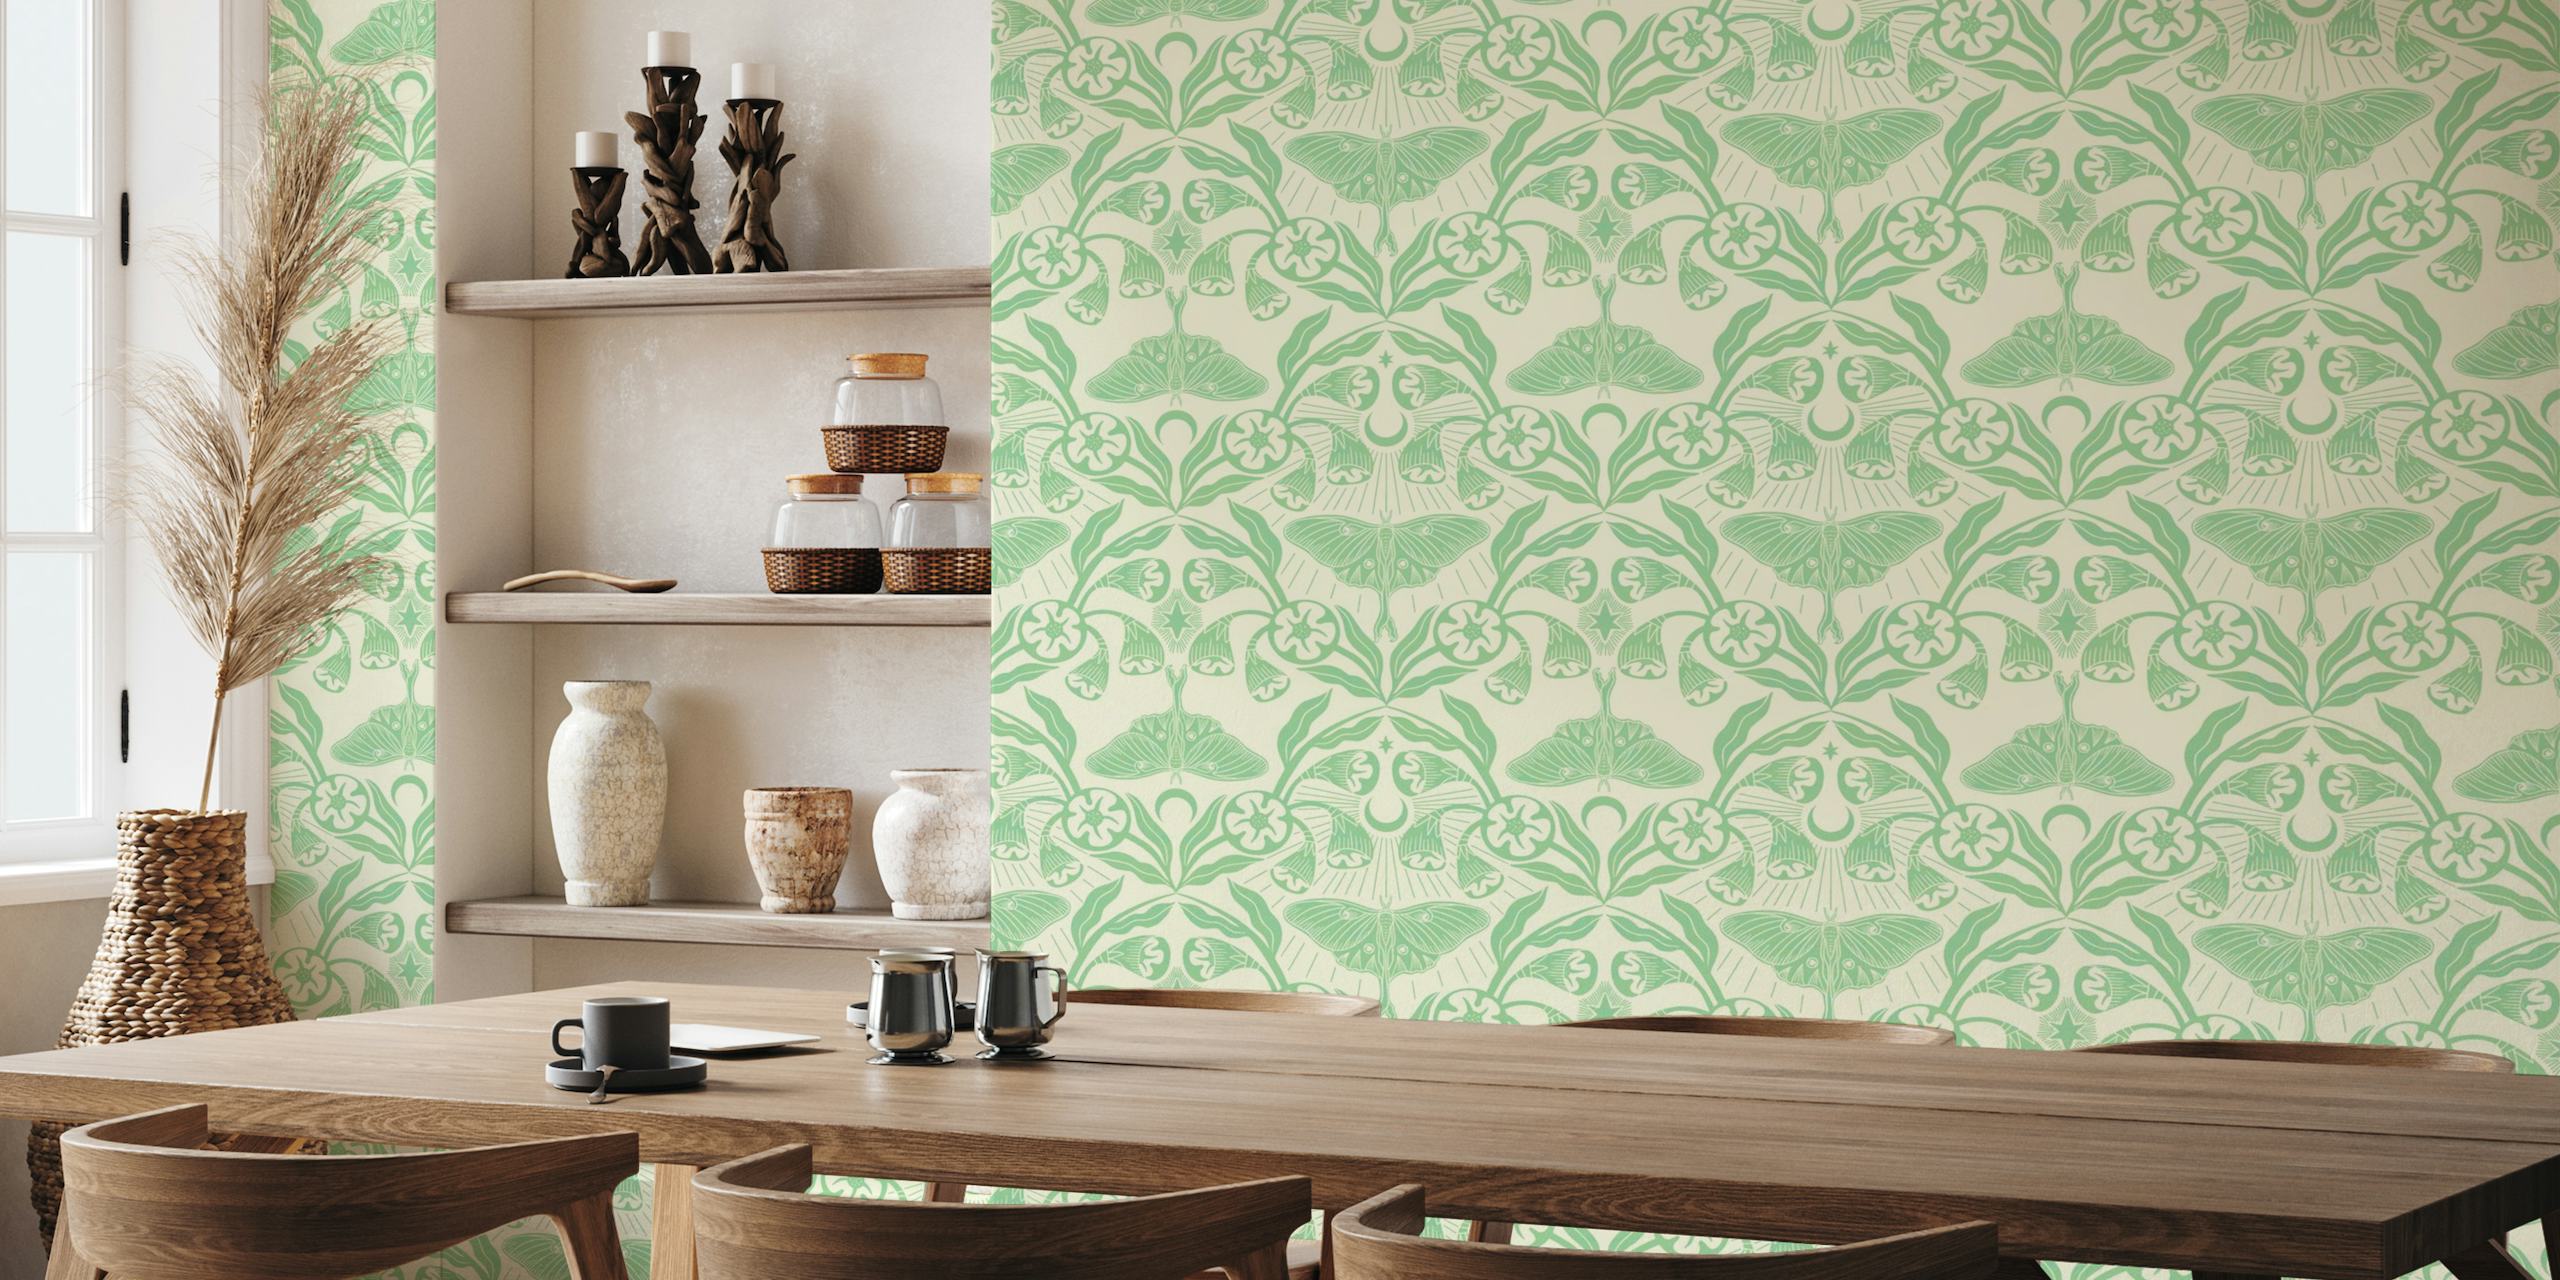 Luna Moth and Moonflowers in Green wallpaper